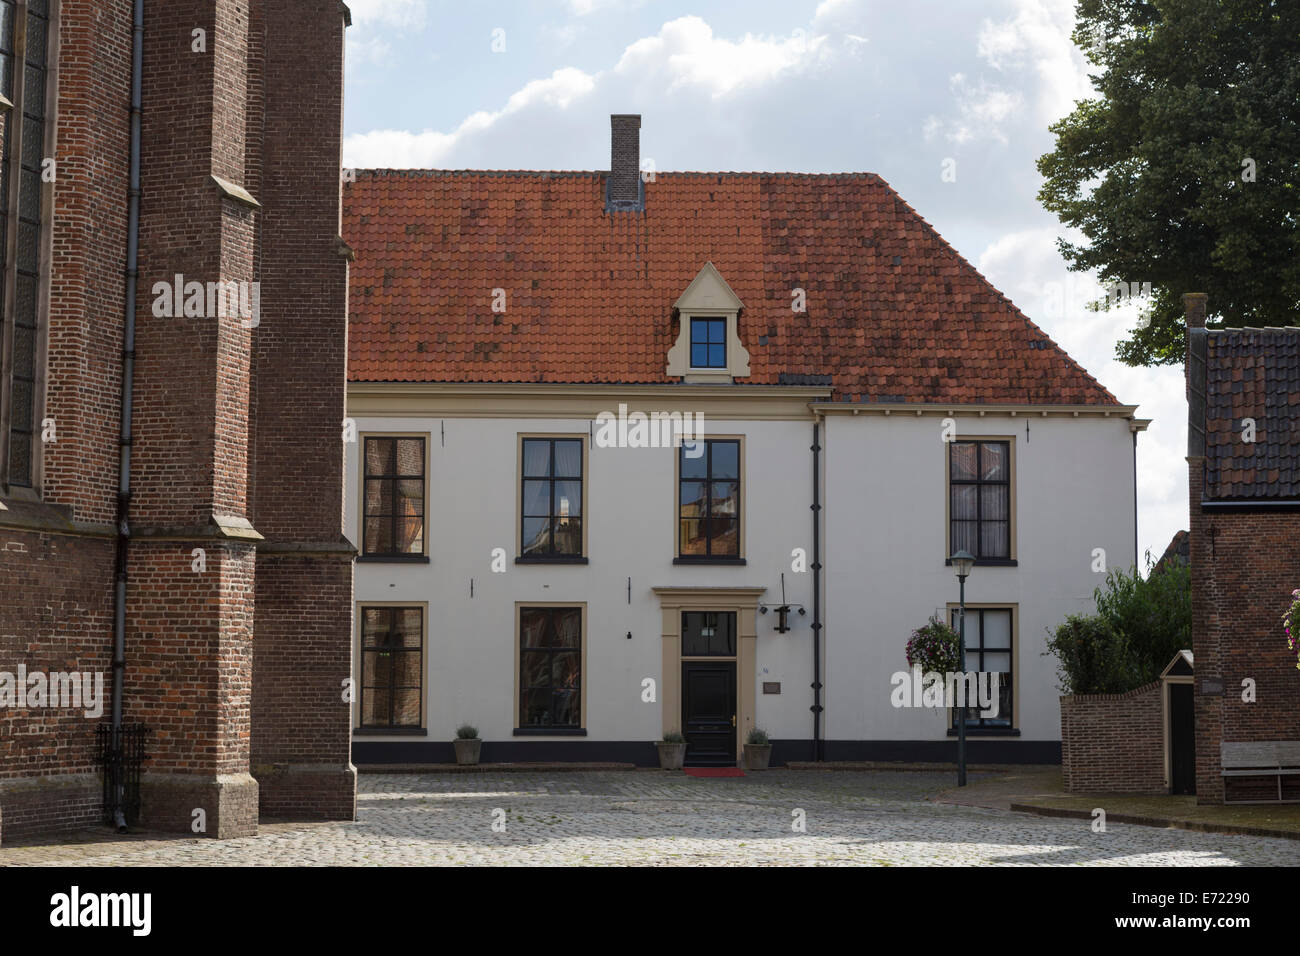 Former school of the city Hattem, a historical hanseatic little town in the province Gelderland in the Netherlands Stock Photo